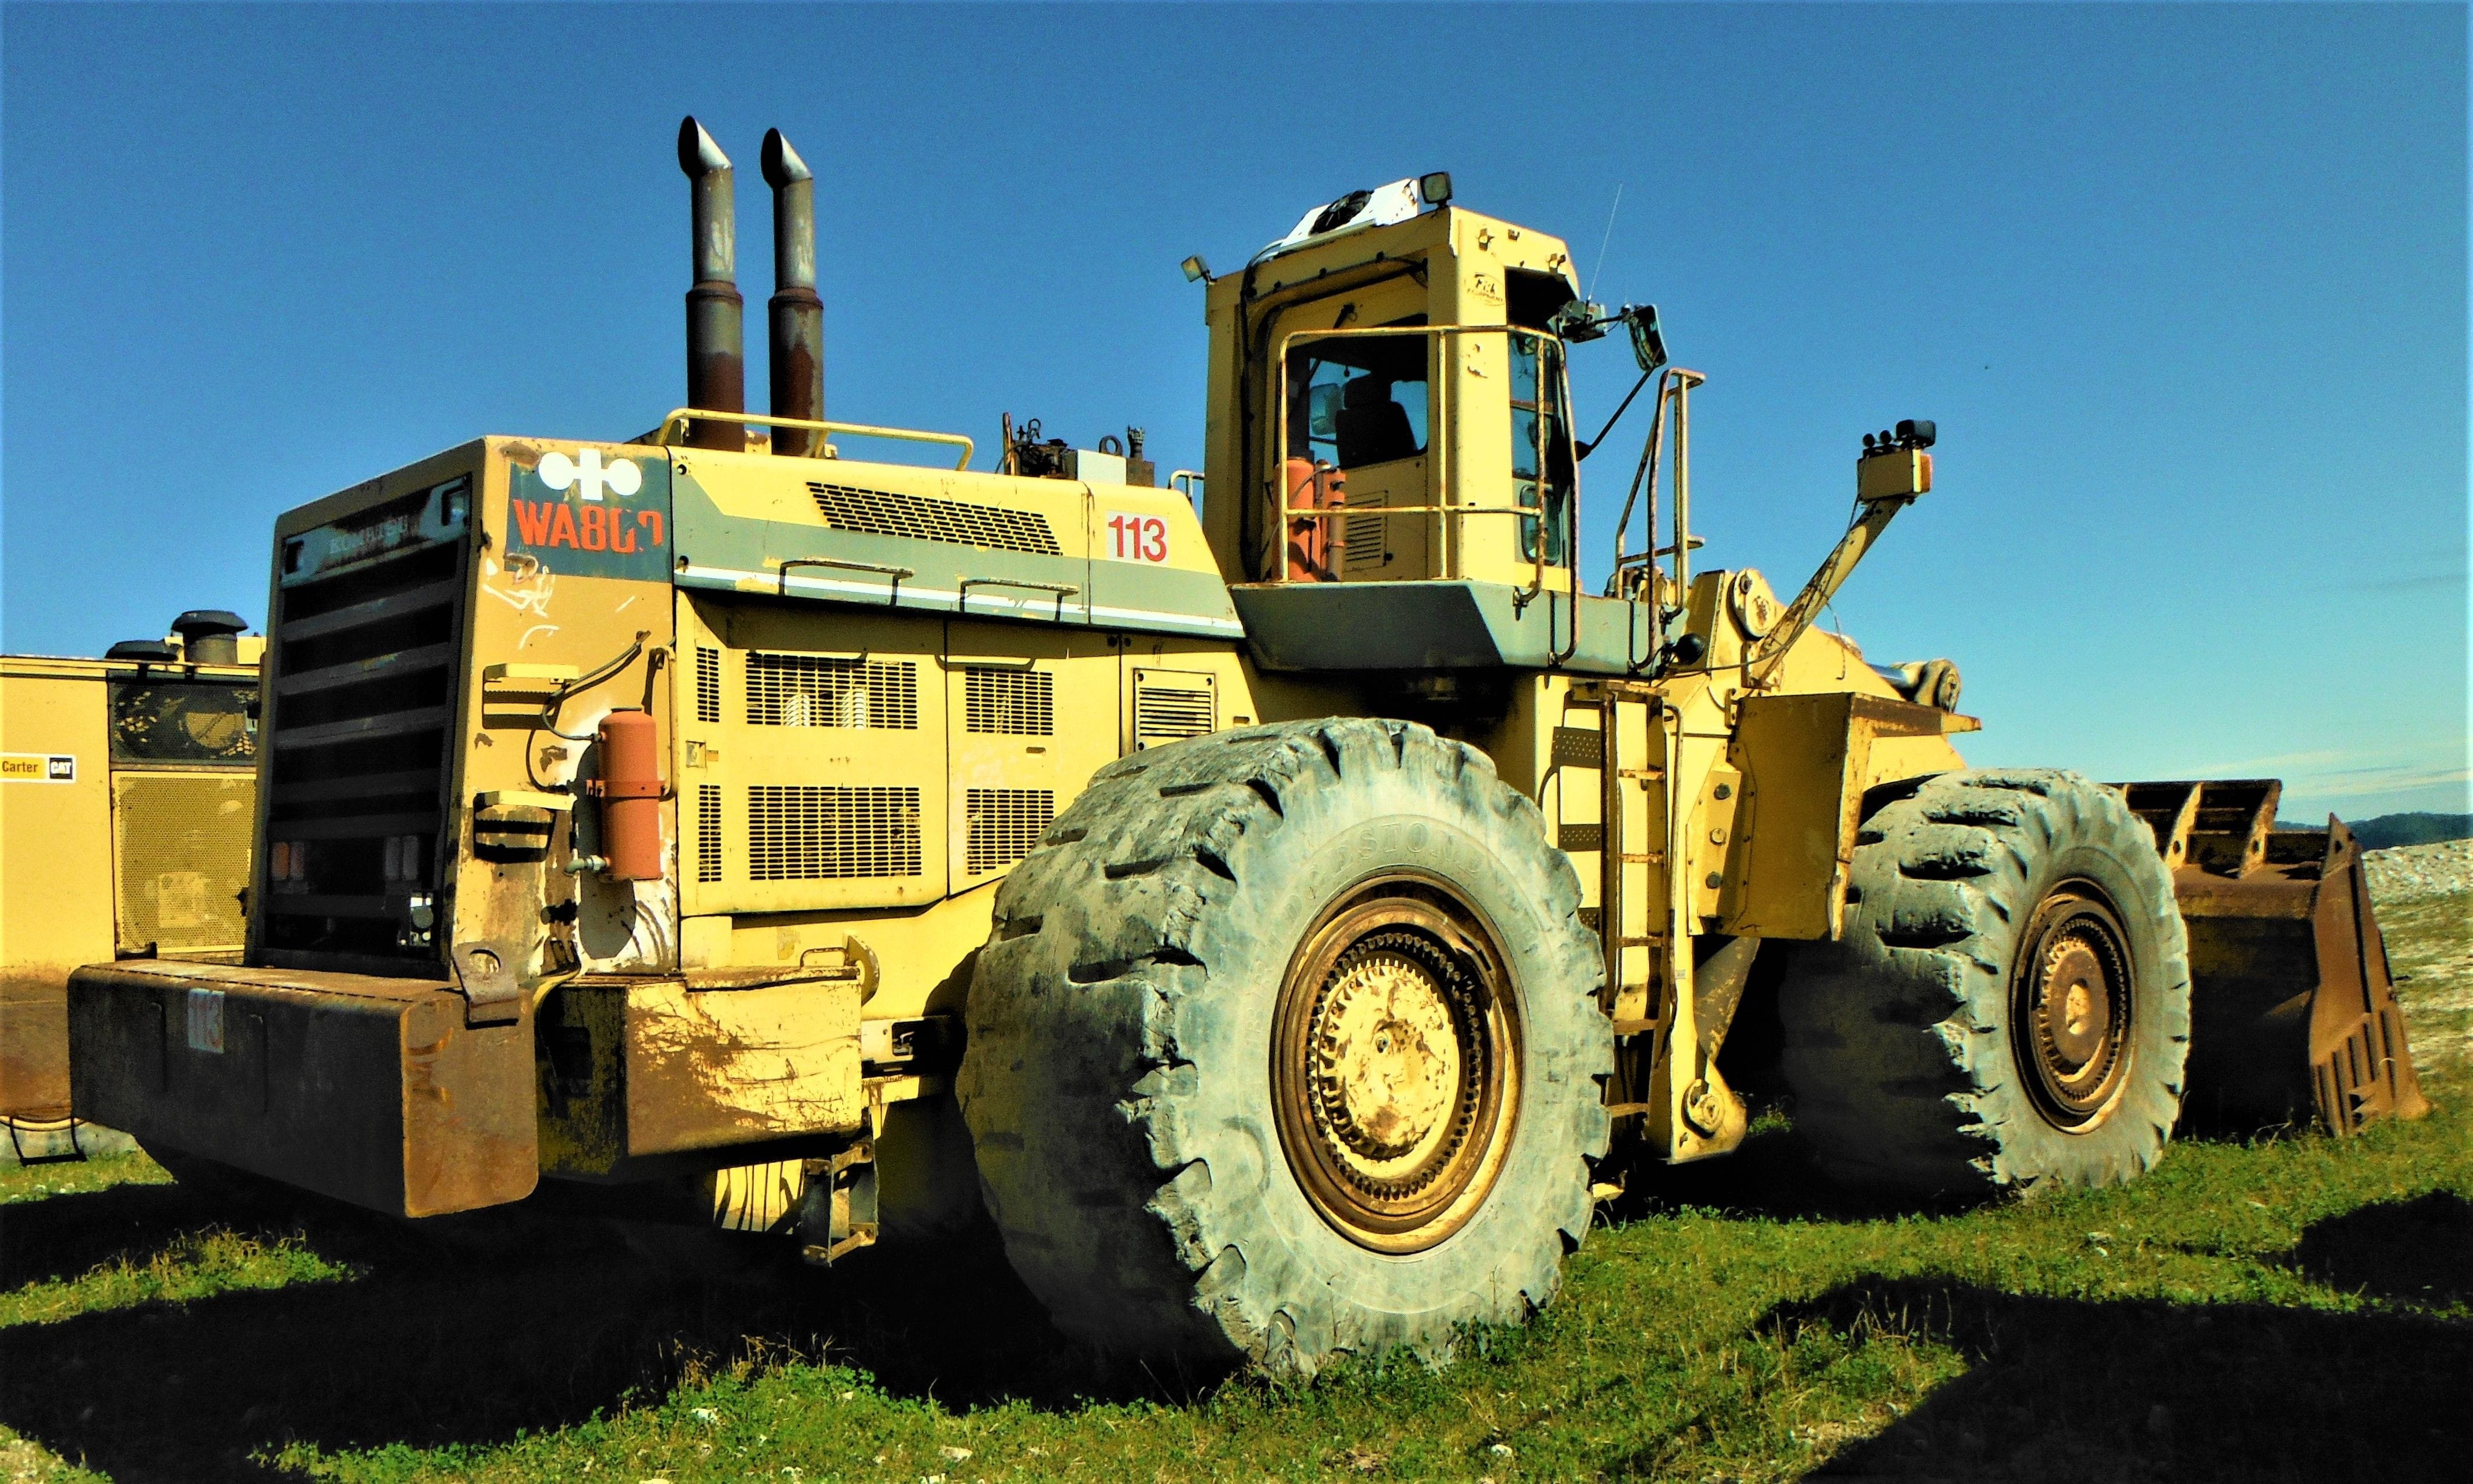 Rearview of a Loader